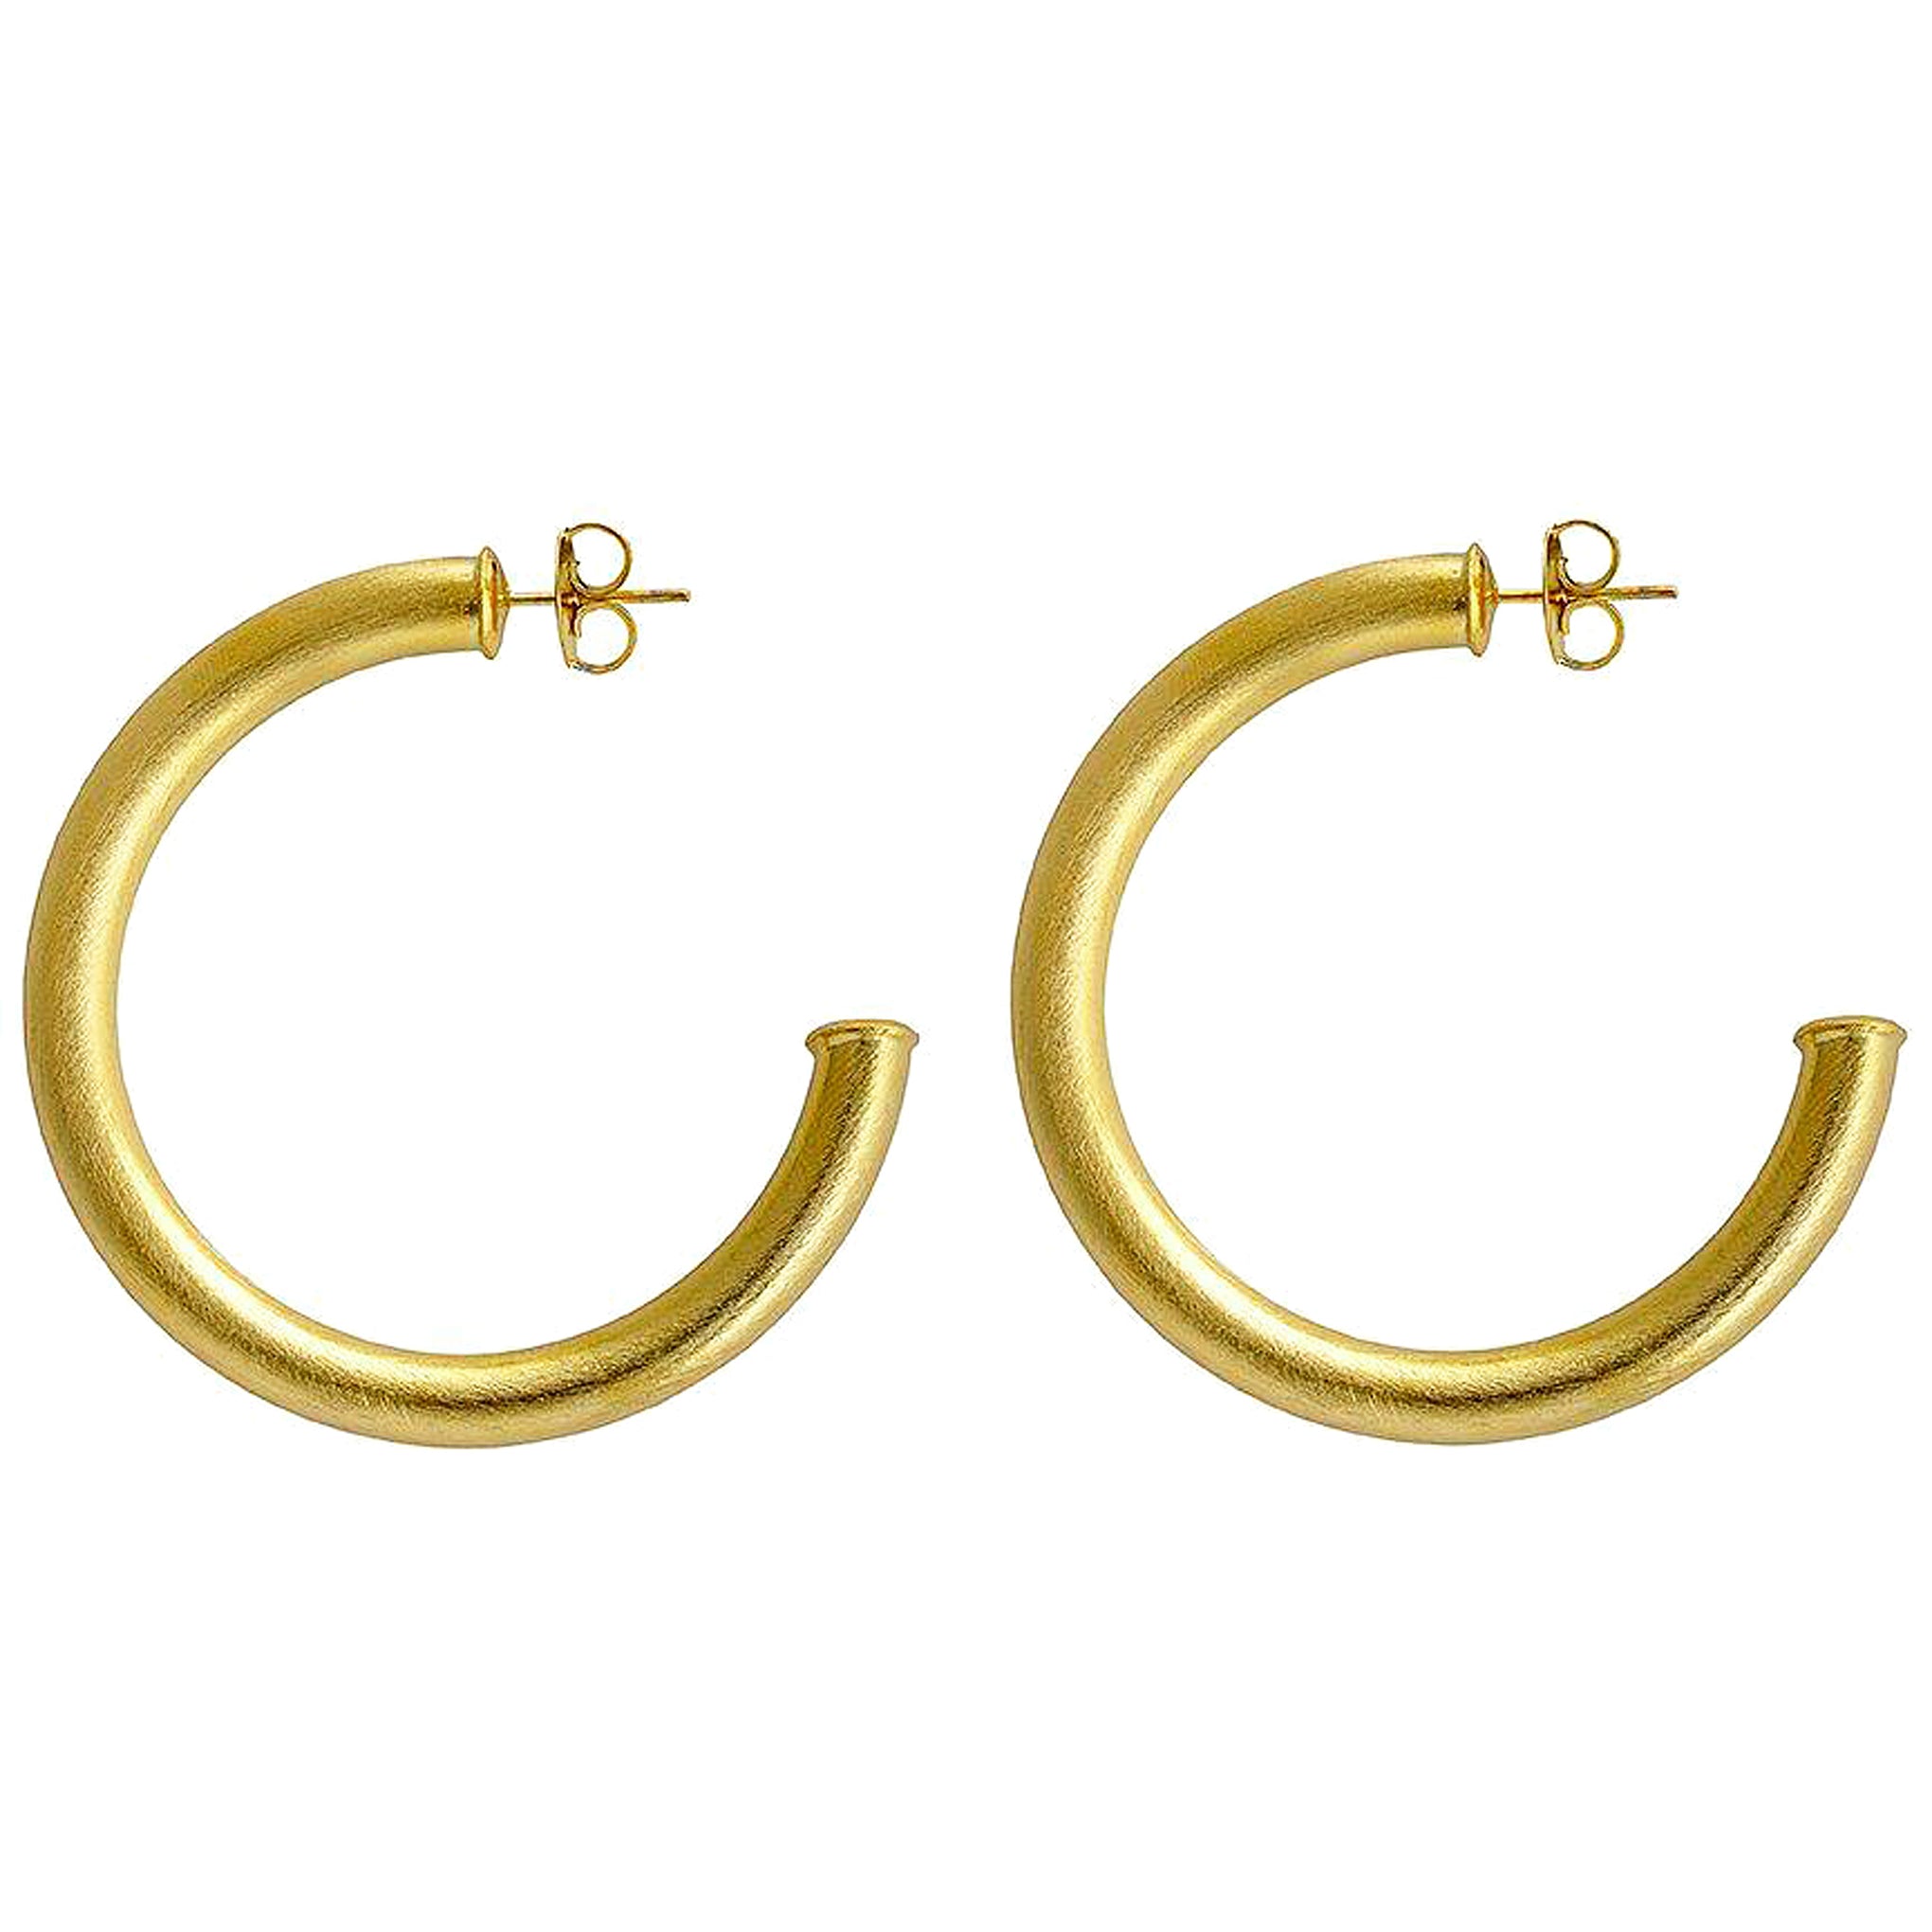 Sheila Fajl Thick Smaller Arlene 2 inch Hoop Earrings in Brushed Gold Plated